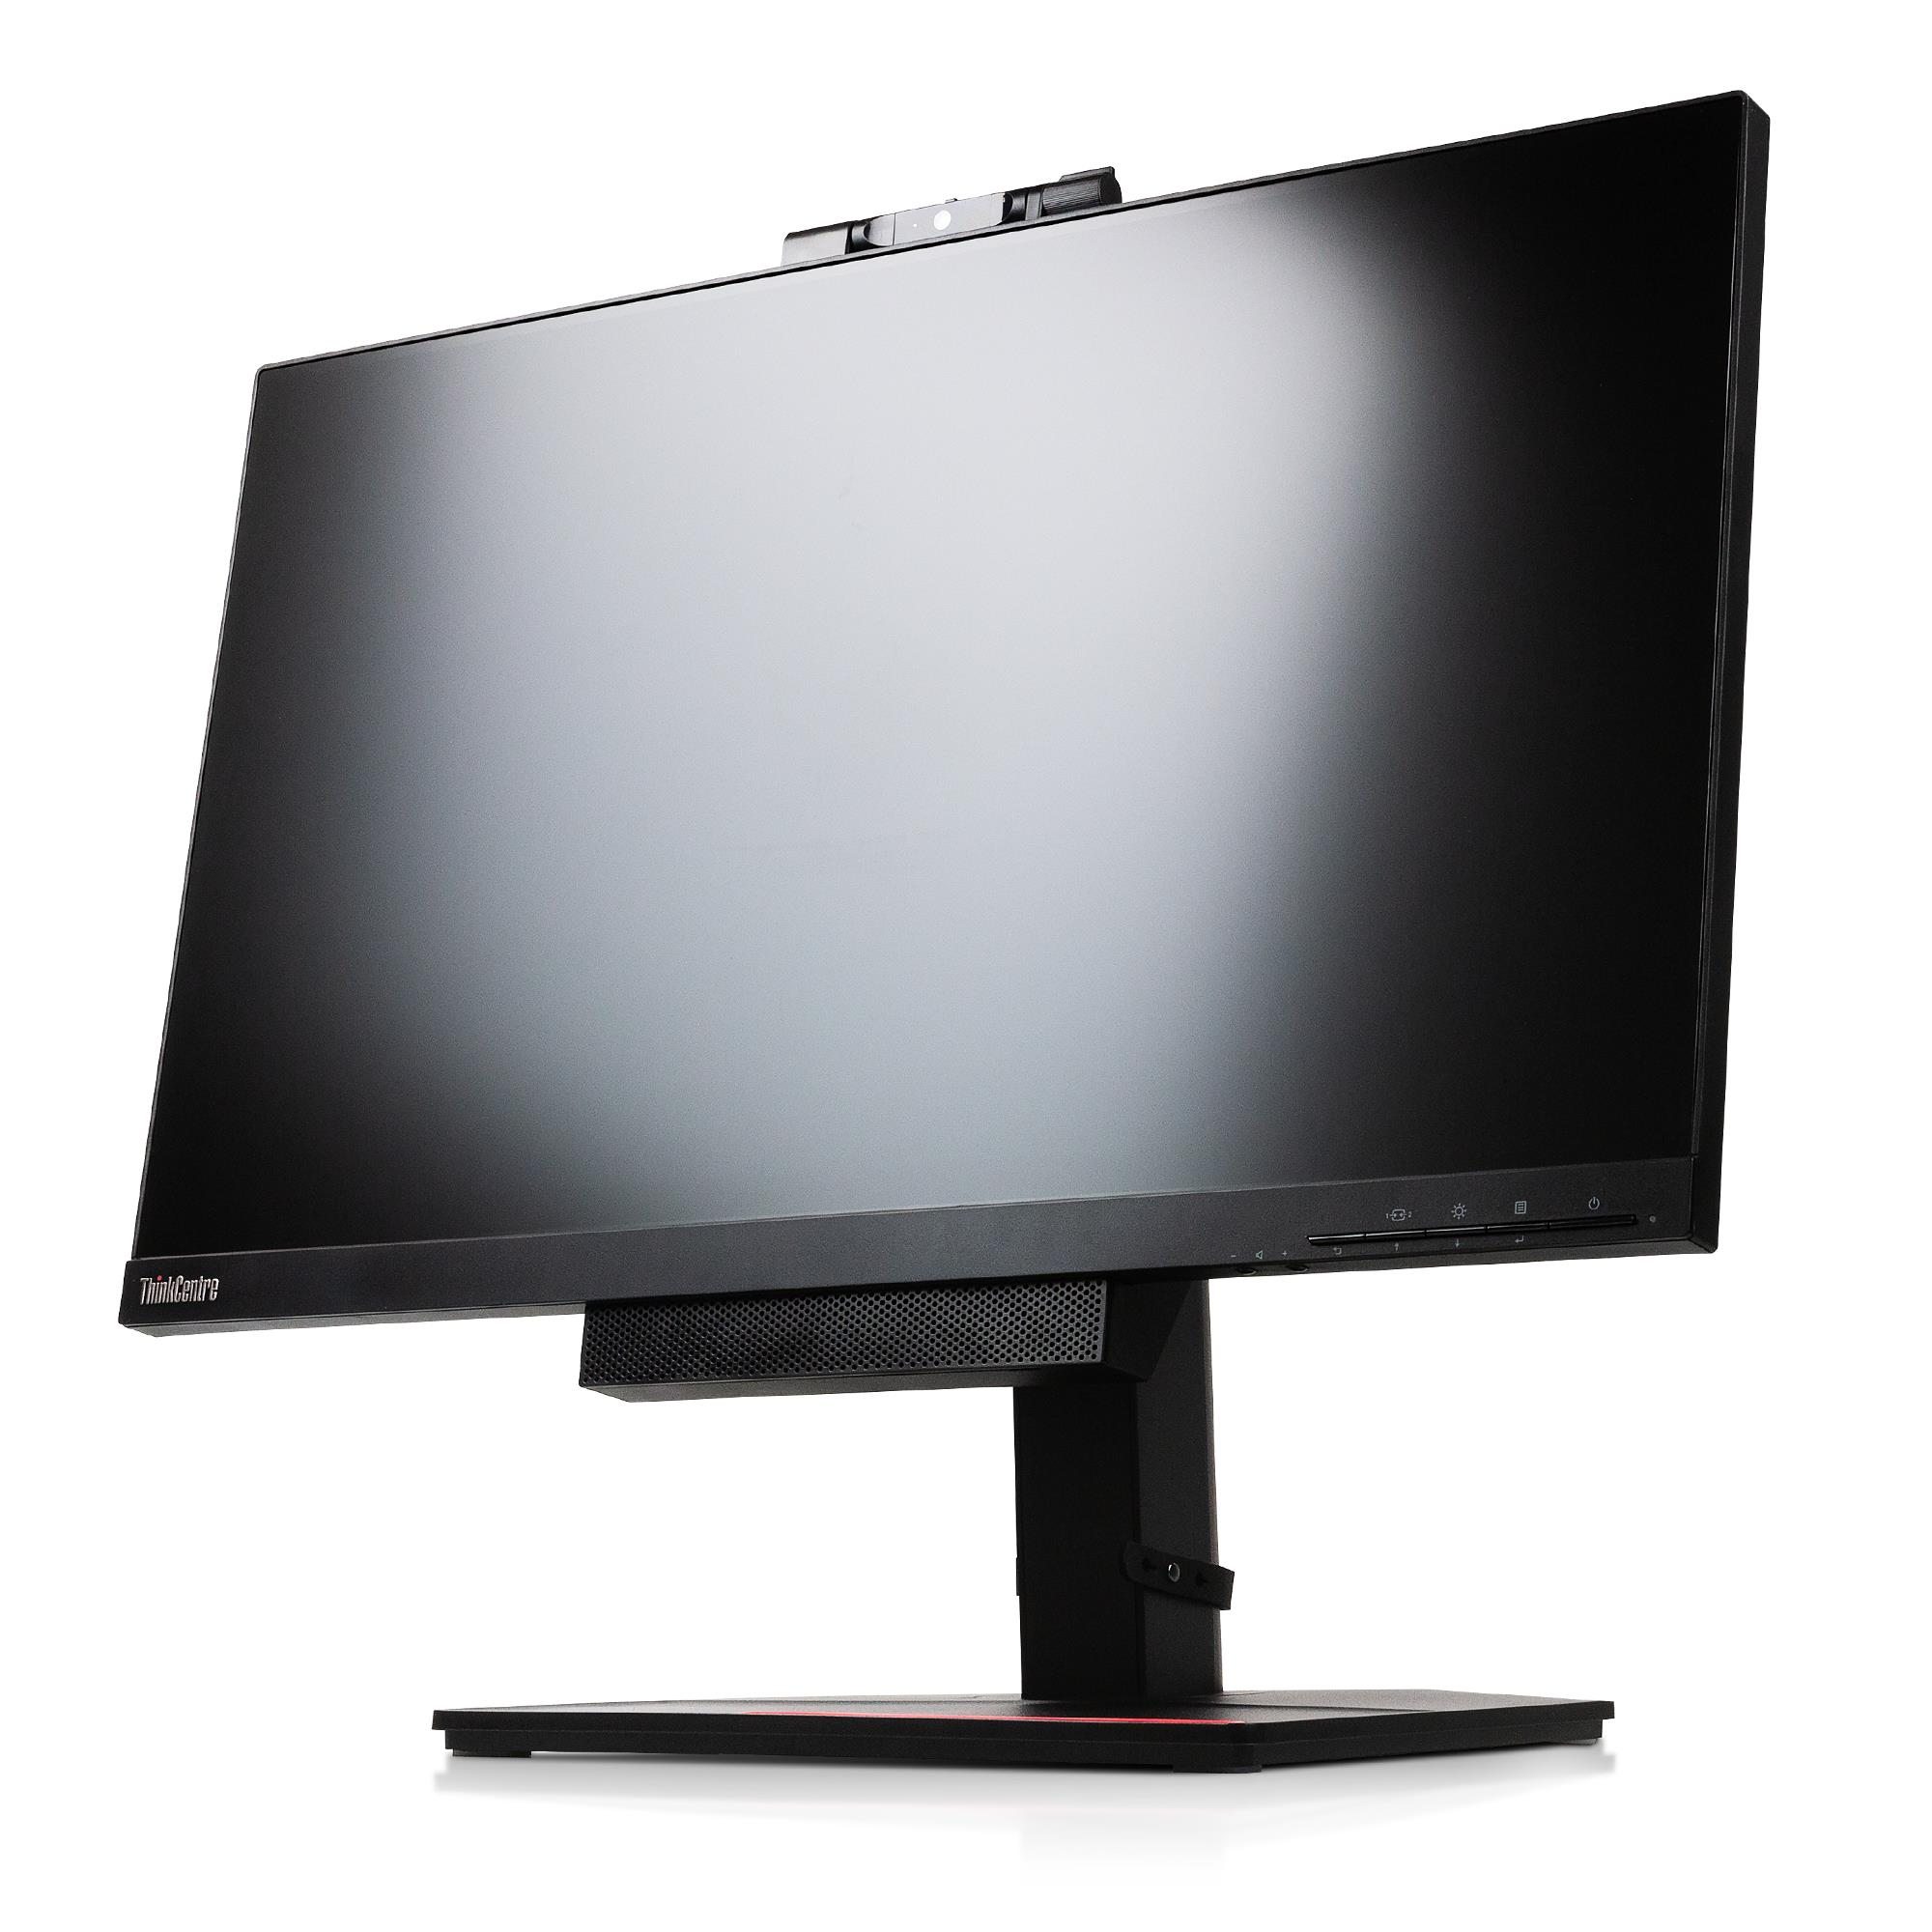 LENOVO REFURBISHED (*) ThinkCentre Tiny-in-One Full-HD ) TFT-Monitor (14 Gen4 Reaktionszeit Zoll 24 23,80 ms